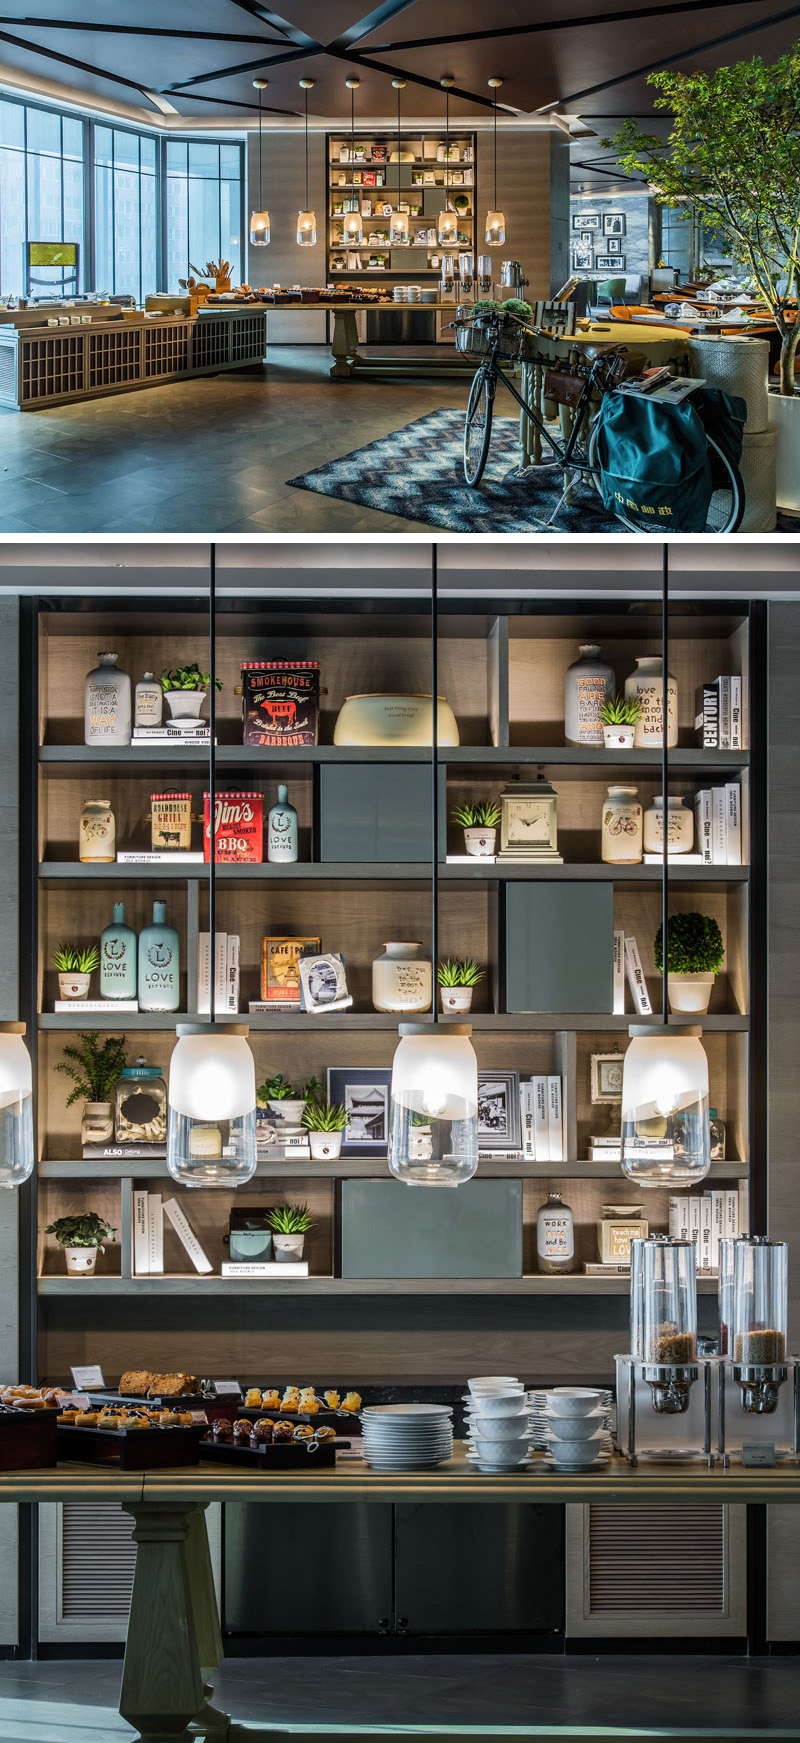 In this modern hotel restaurant, jar-like pendant lights hang above the self-serve counter located in front of a bookcase, that's filled with recipe books and trinkets reminiscent of a home kitchen.